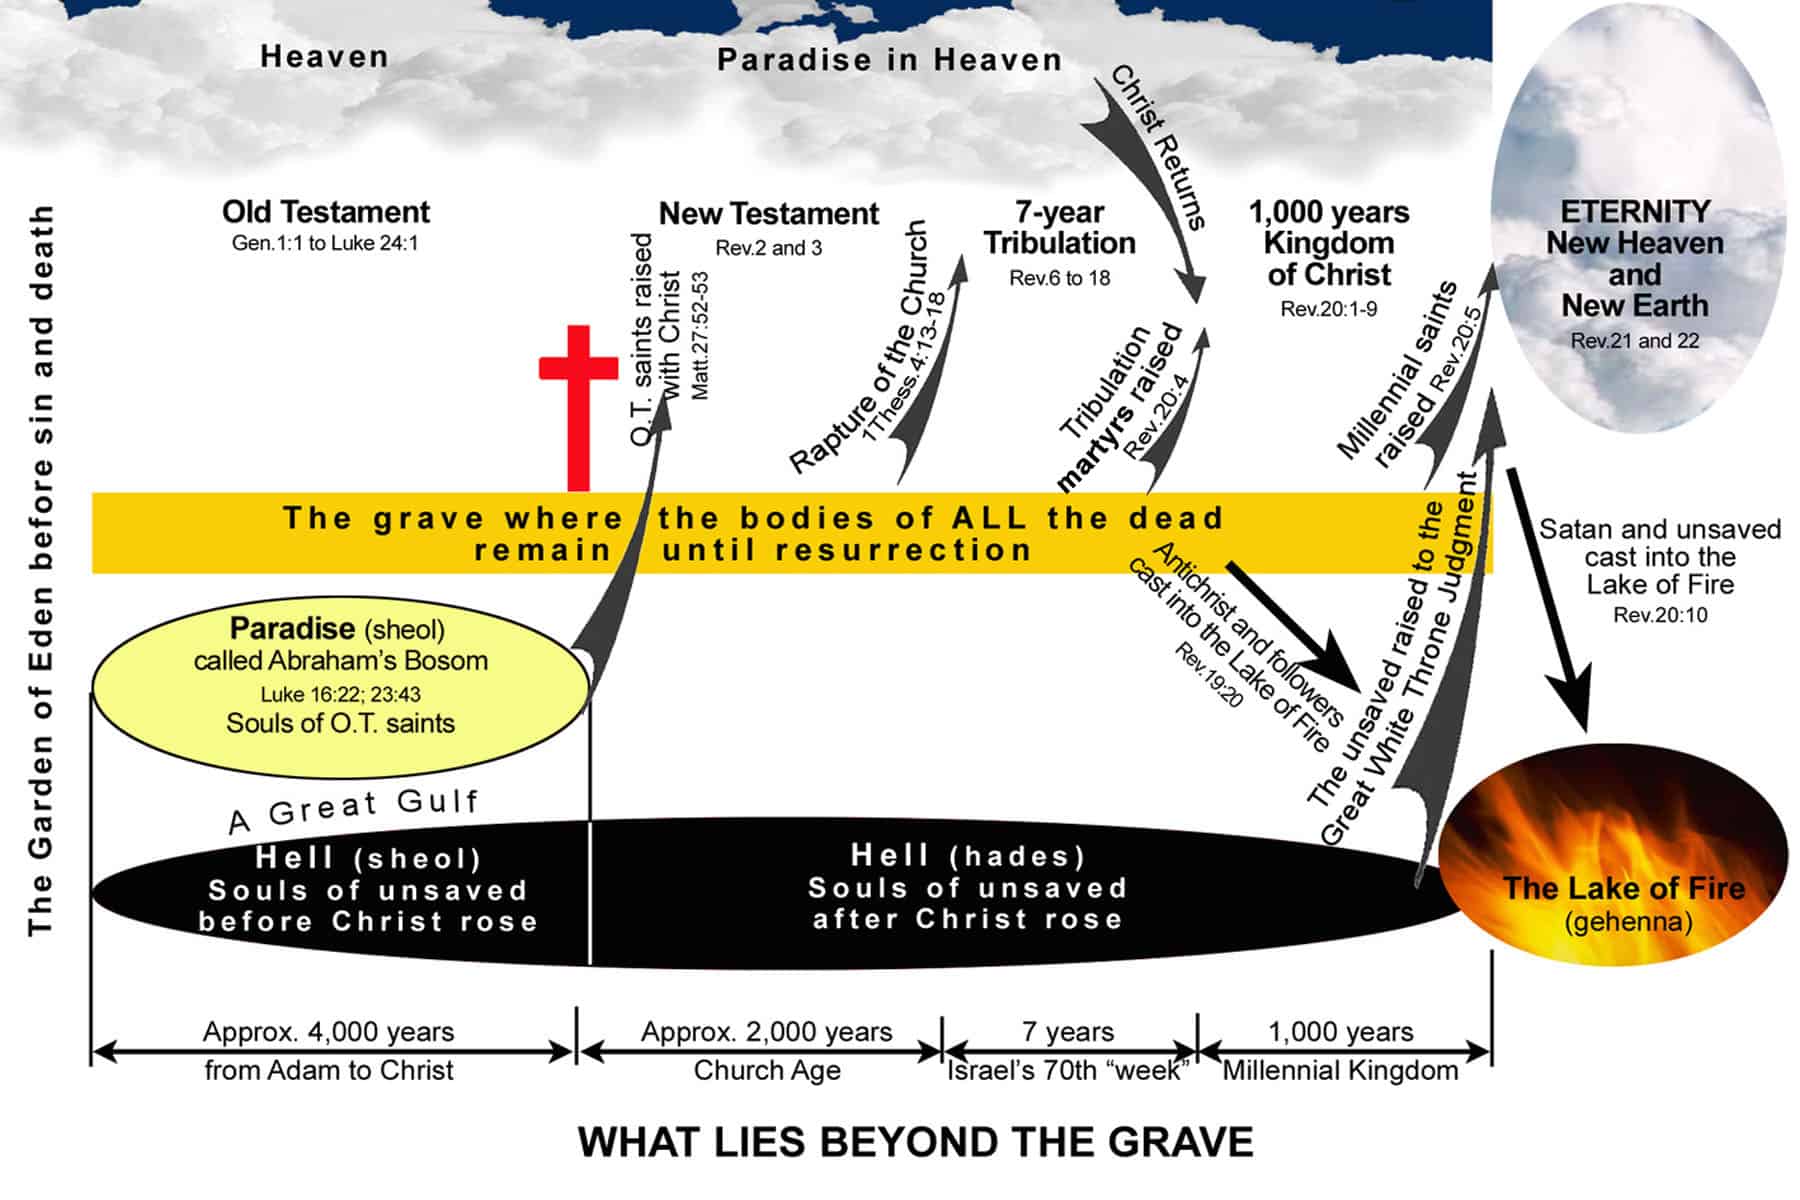 BEYOND THE GRAVE IN OLD TESTAMENT AND NEW TESTAMENT